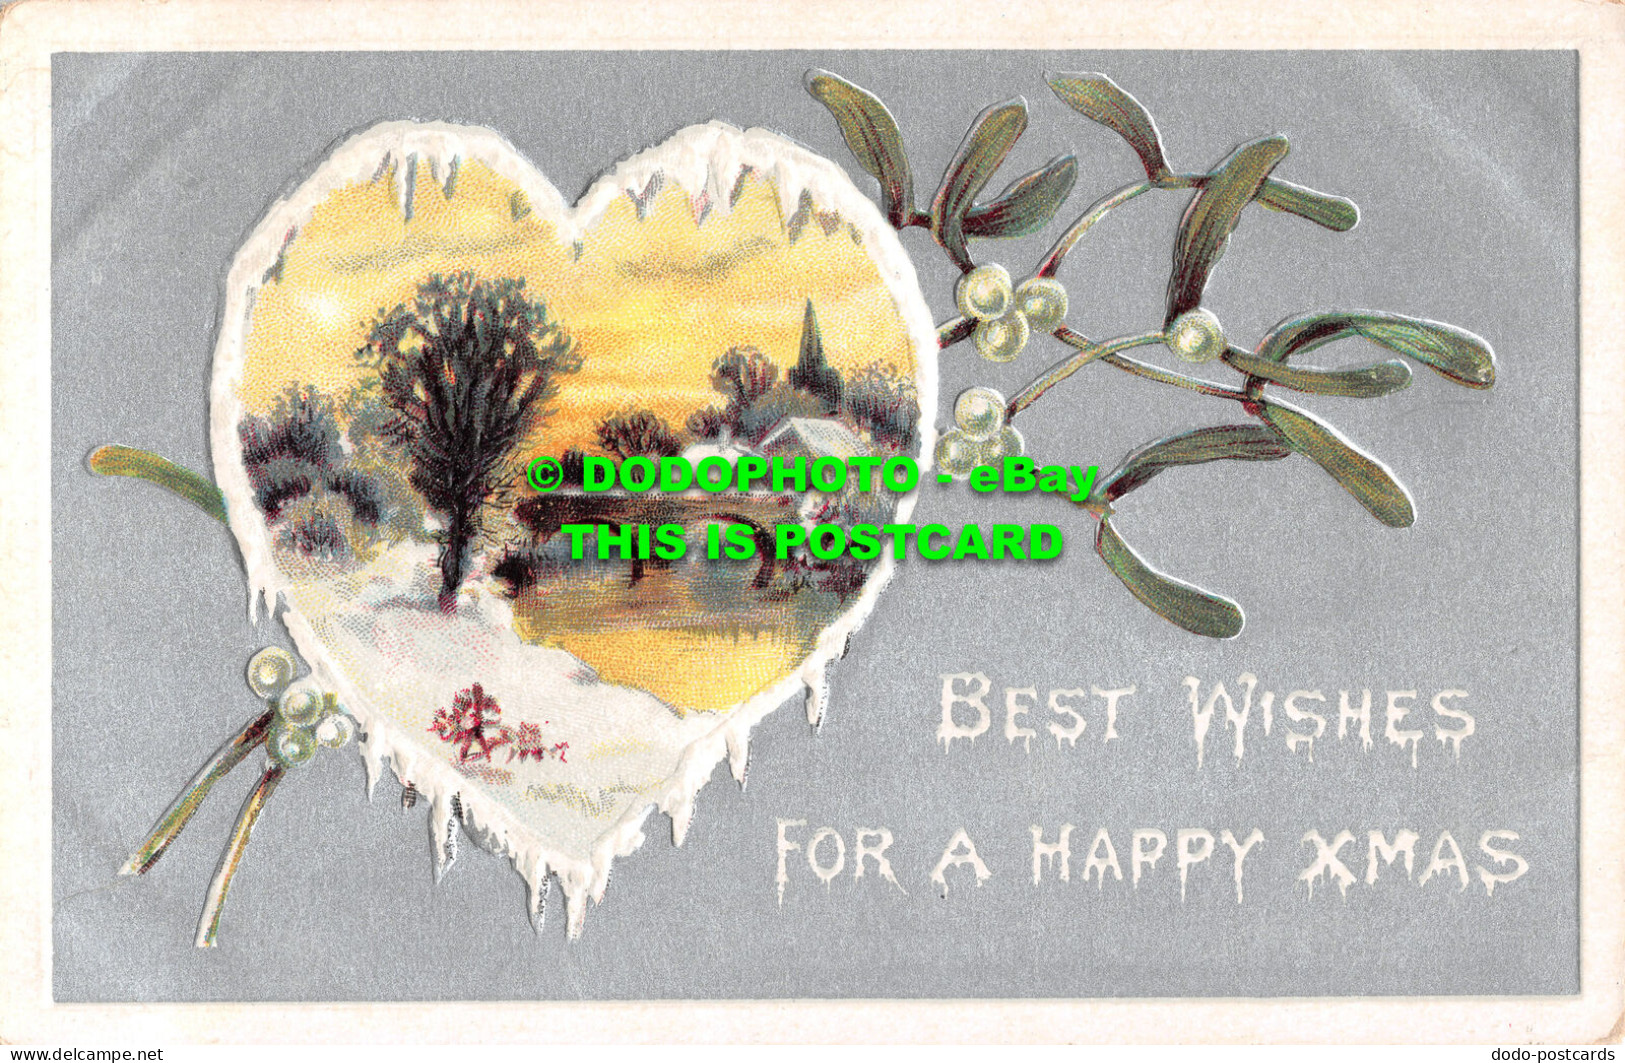 R492593 Best Wishes For A Happy Xmas. Davidson Bros. Pictorial Post Cards. Serie - World